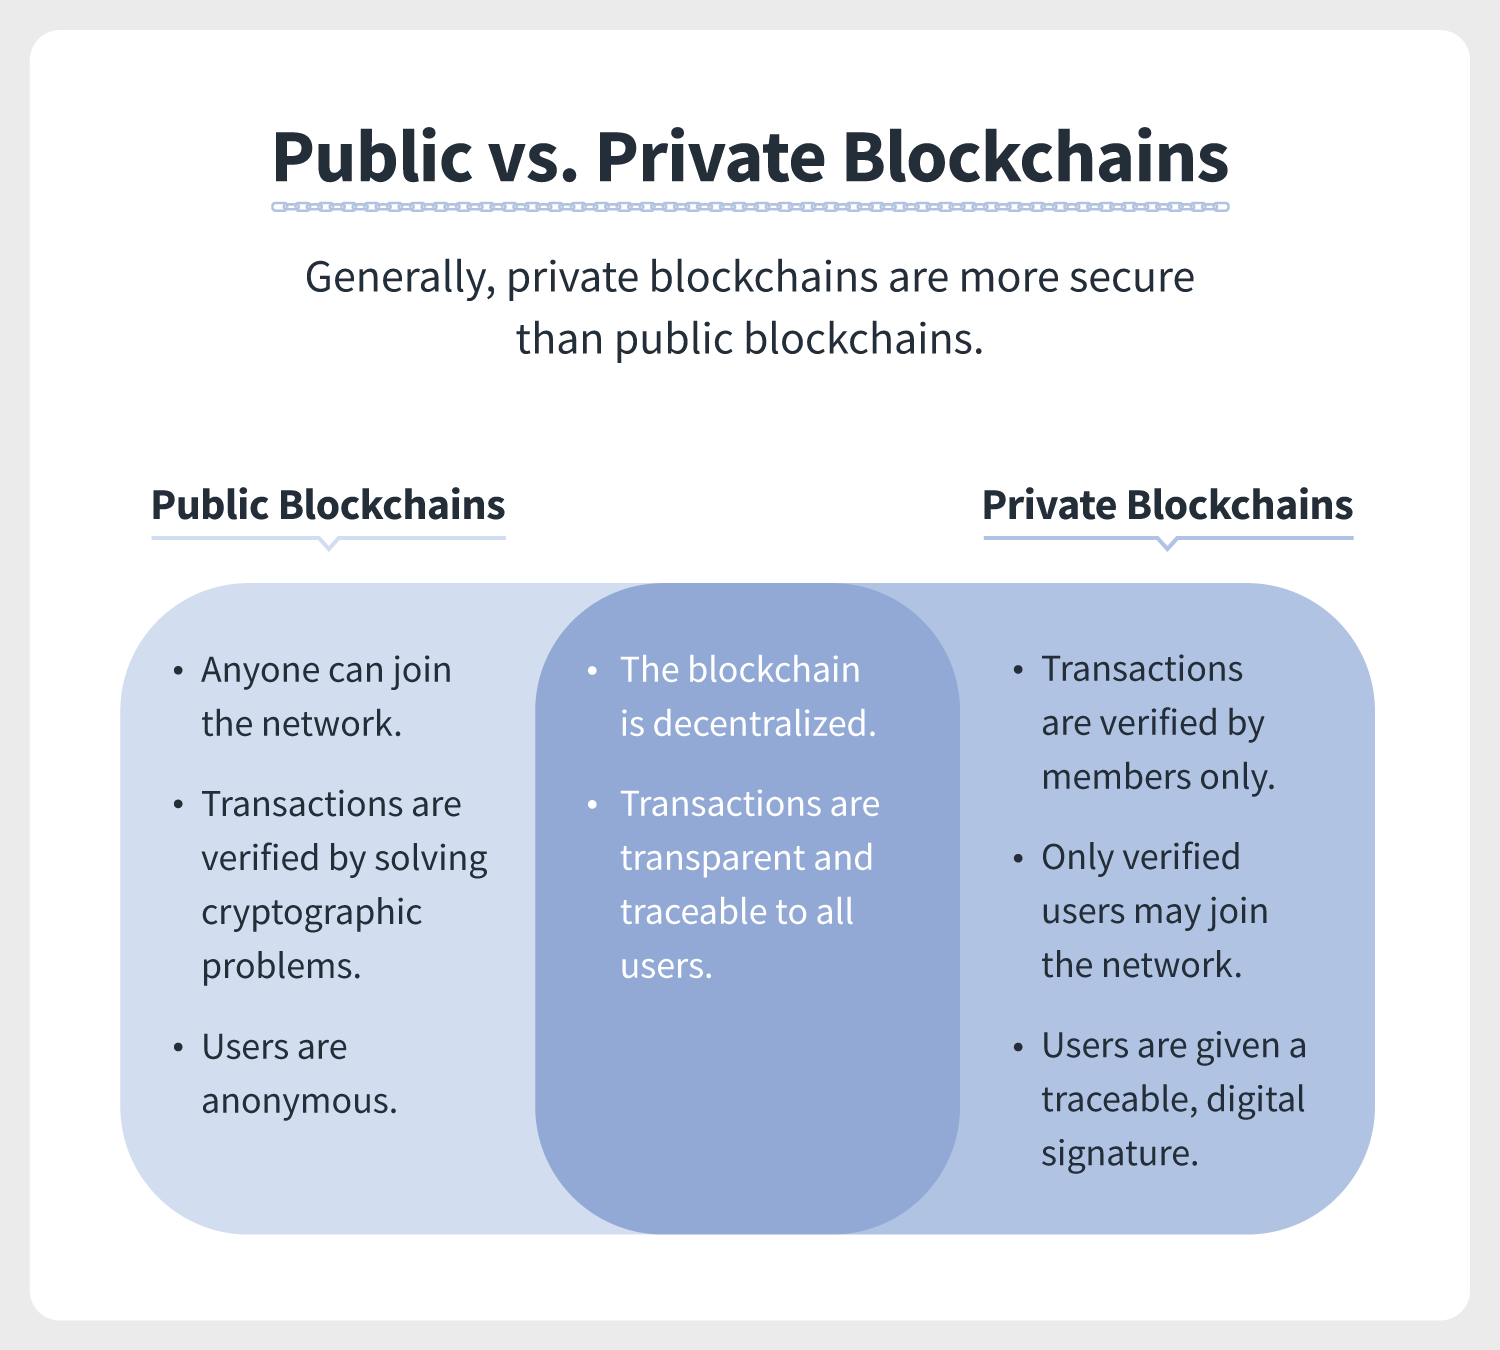 a venn diagram compares and contrasts public and private blockchain networks